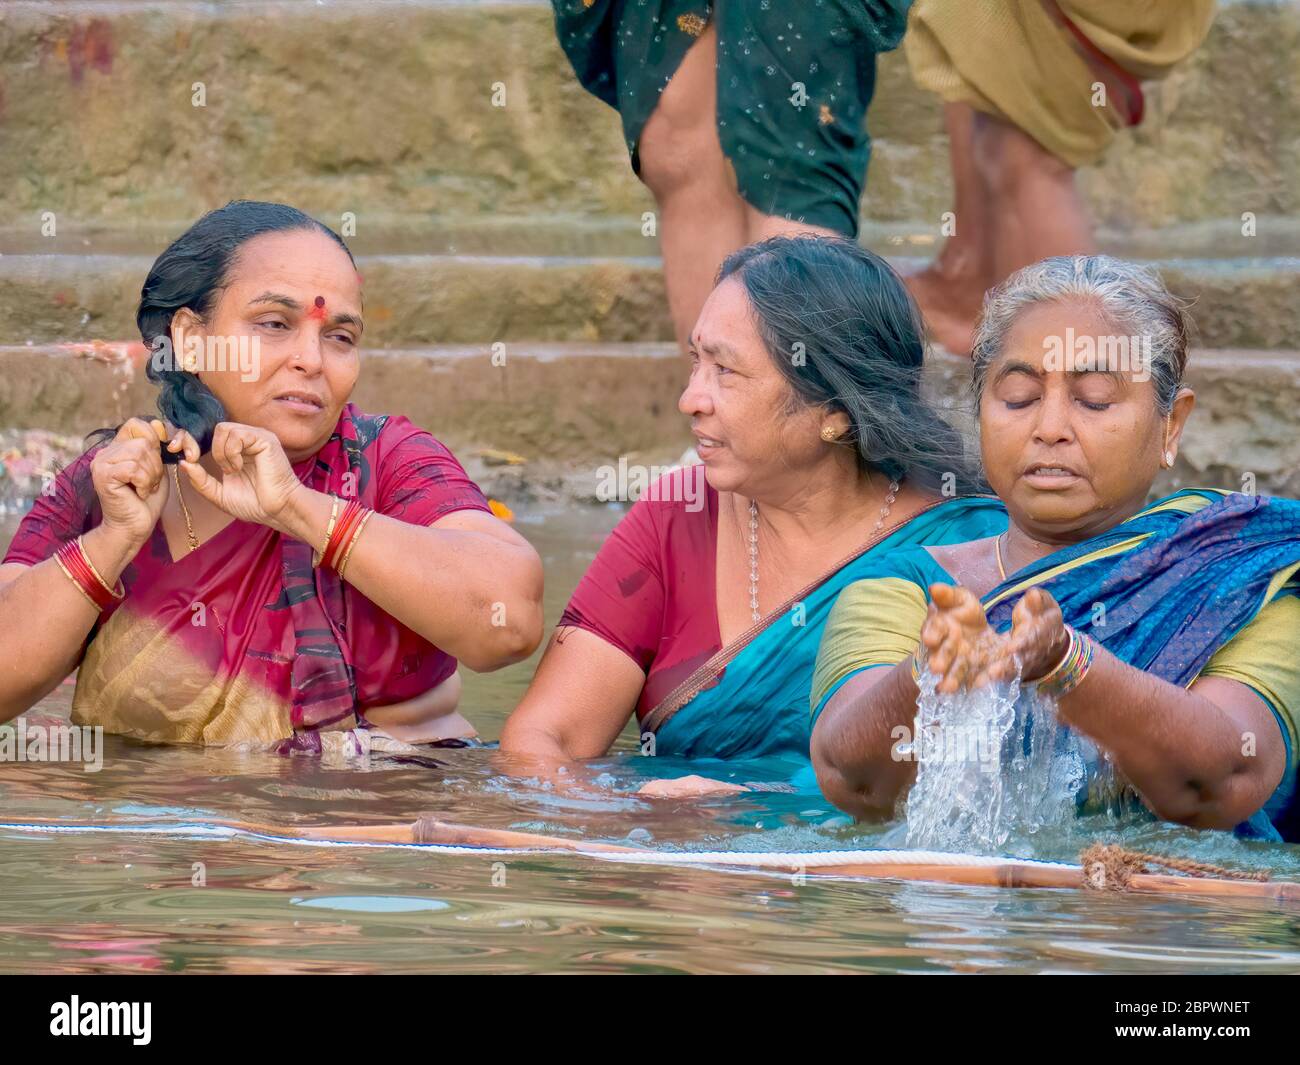 Varanasi, India - Nov 14, 2015. Three Indian women bathe in the Ganges River, on a Hindu religious pilgrimage during the annual Diwali Festival. Stock Photo